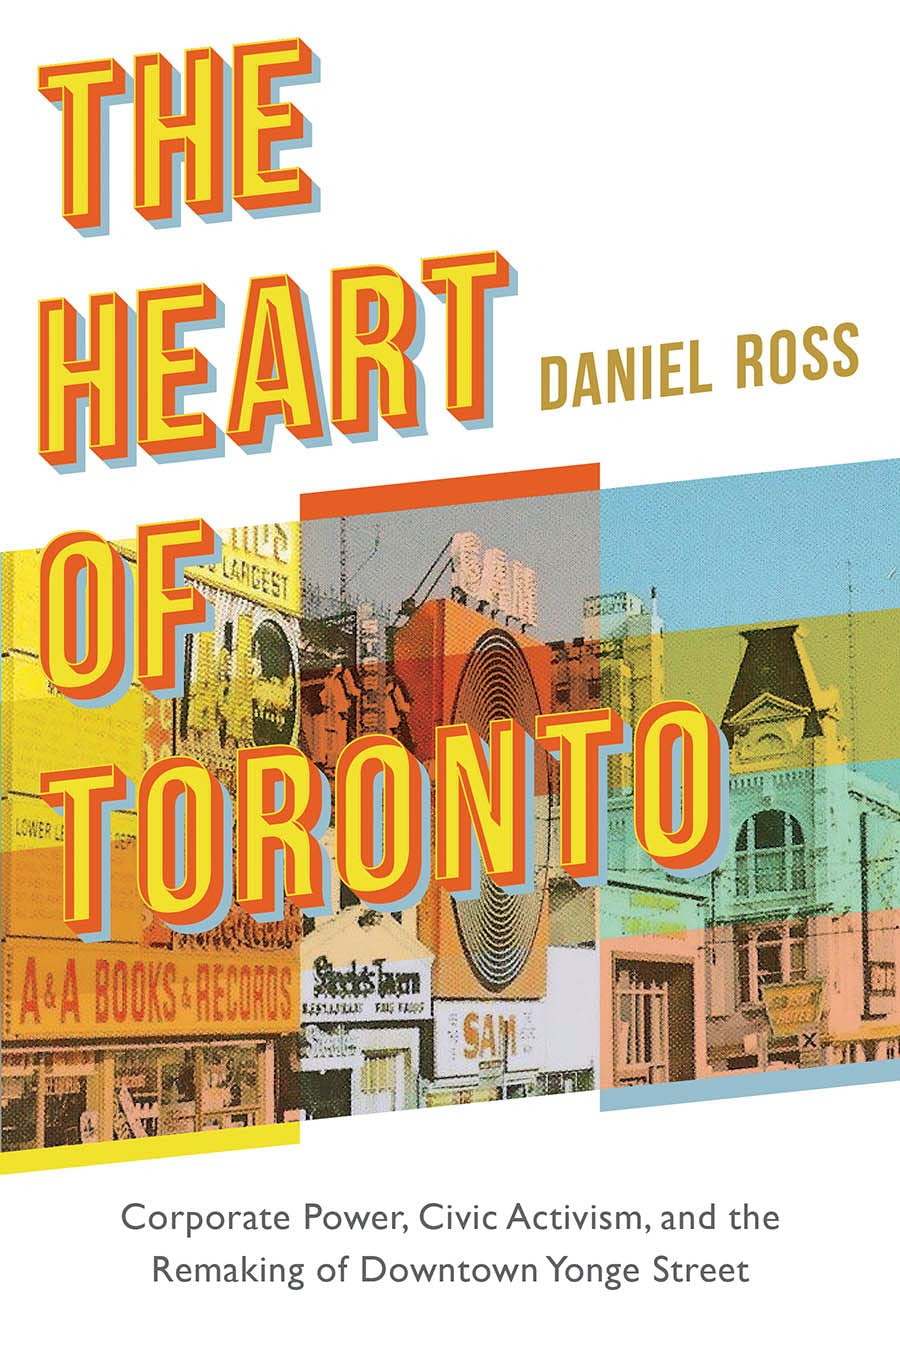 The Heart of Toronto: Corporate Power, Civic Activism, and the Remaking of Downtown  Yonge Street: Ross, Daniel: 9780774867016: Books - Amazon.ca